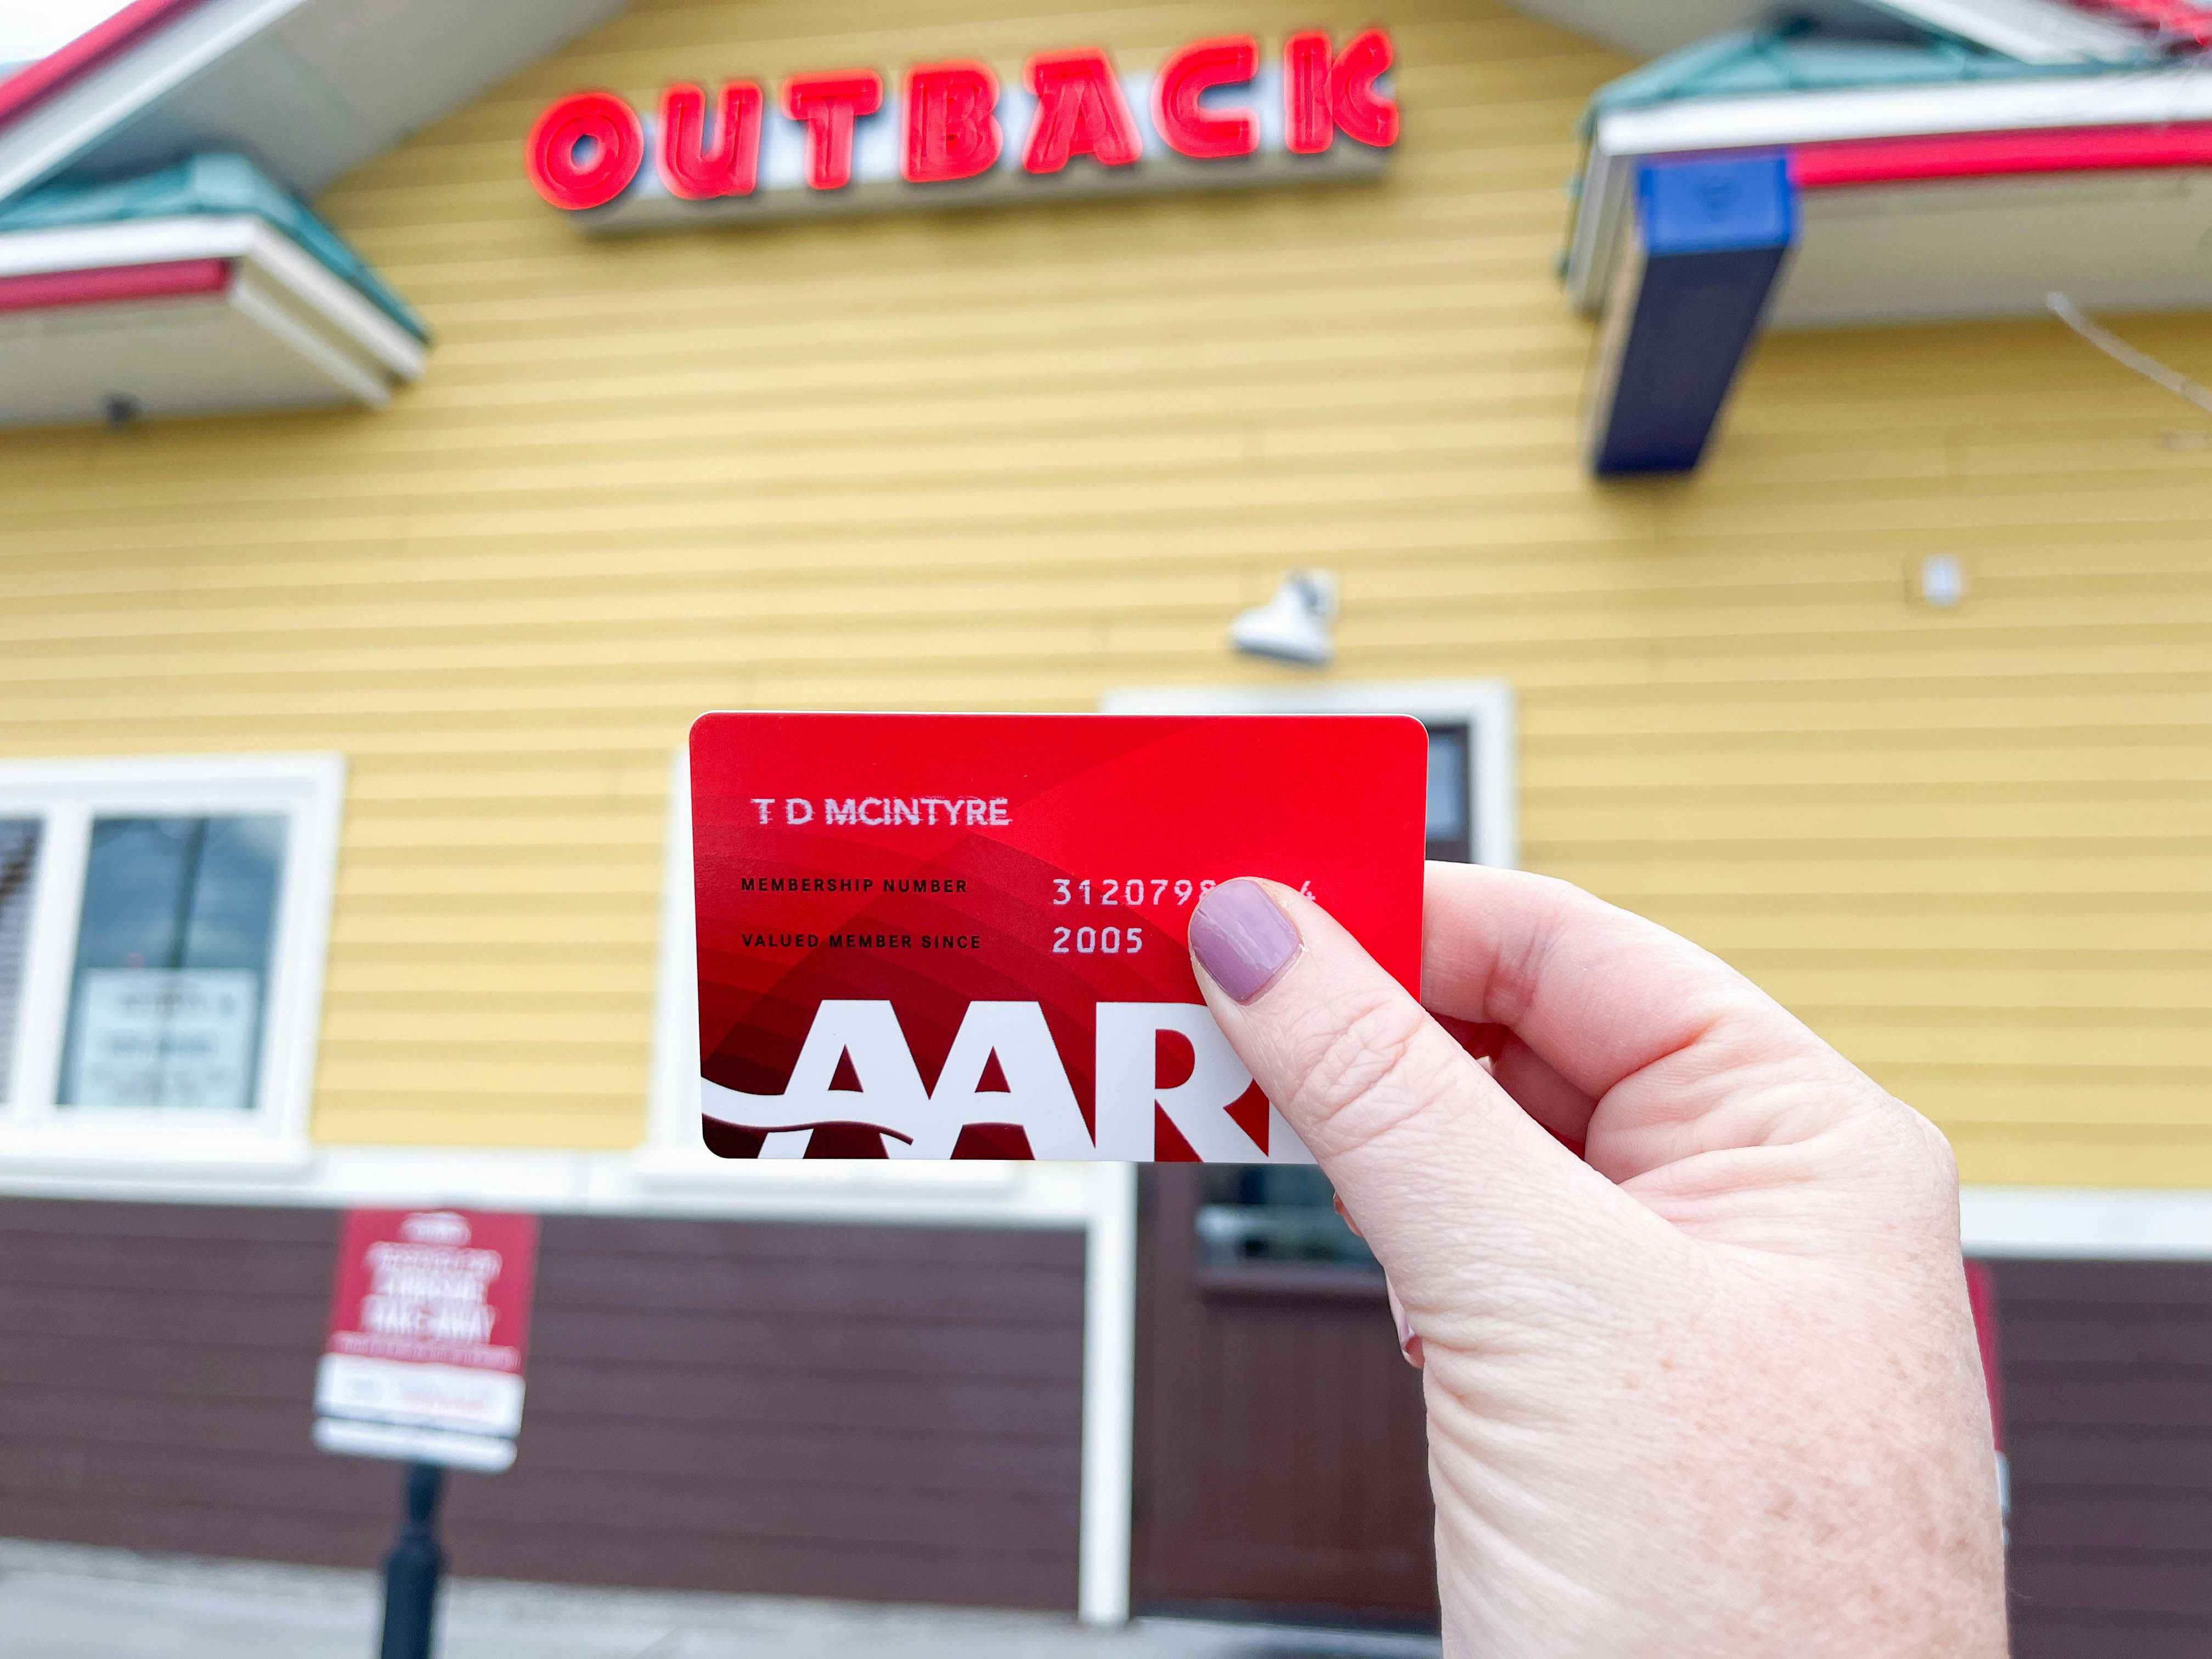 an aarp card being held outside an outback steakhouse